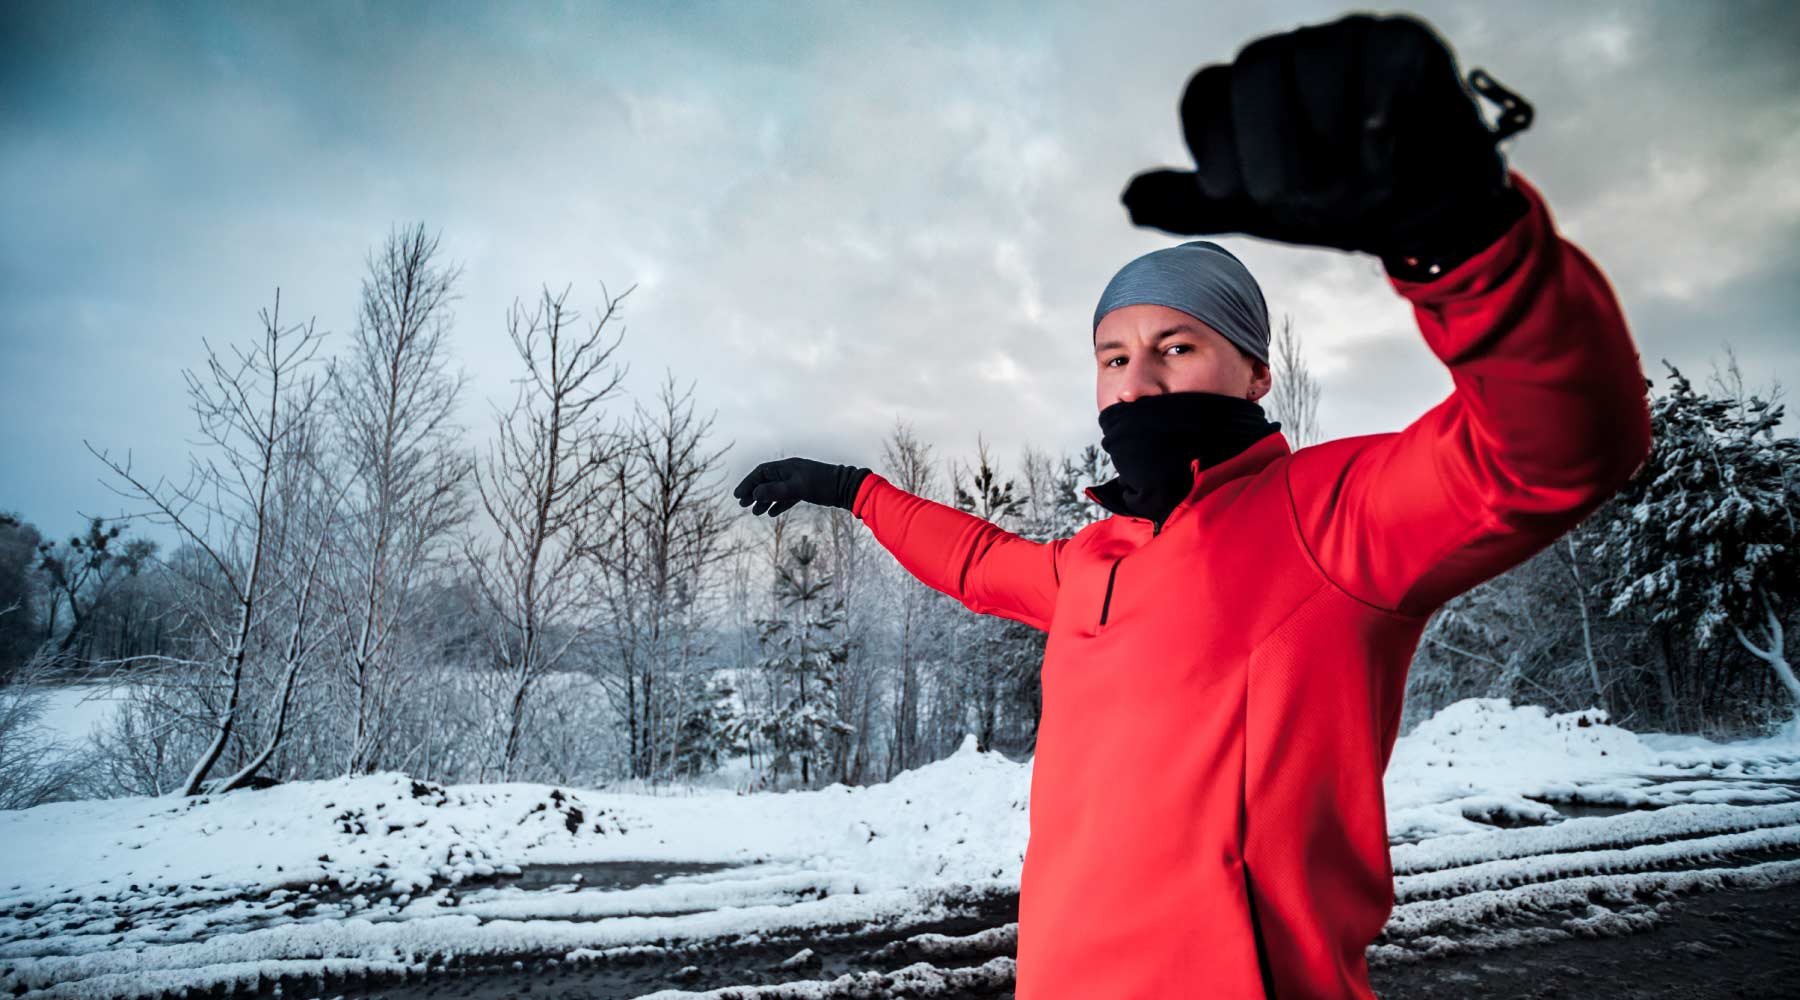 battery powered heated clothing can keep you warm in the most extreme cold conditions with adjustable heat